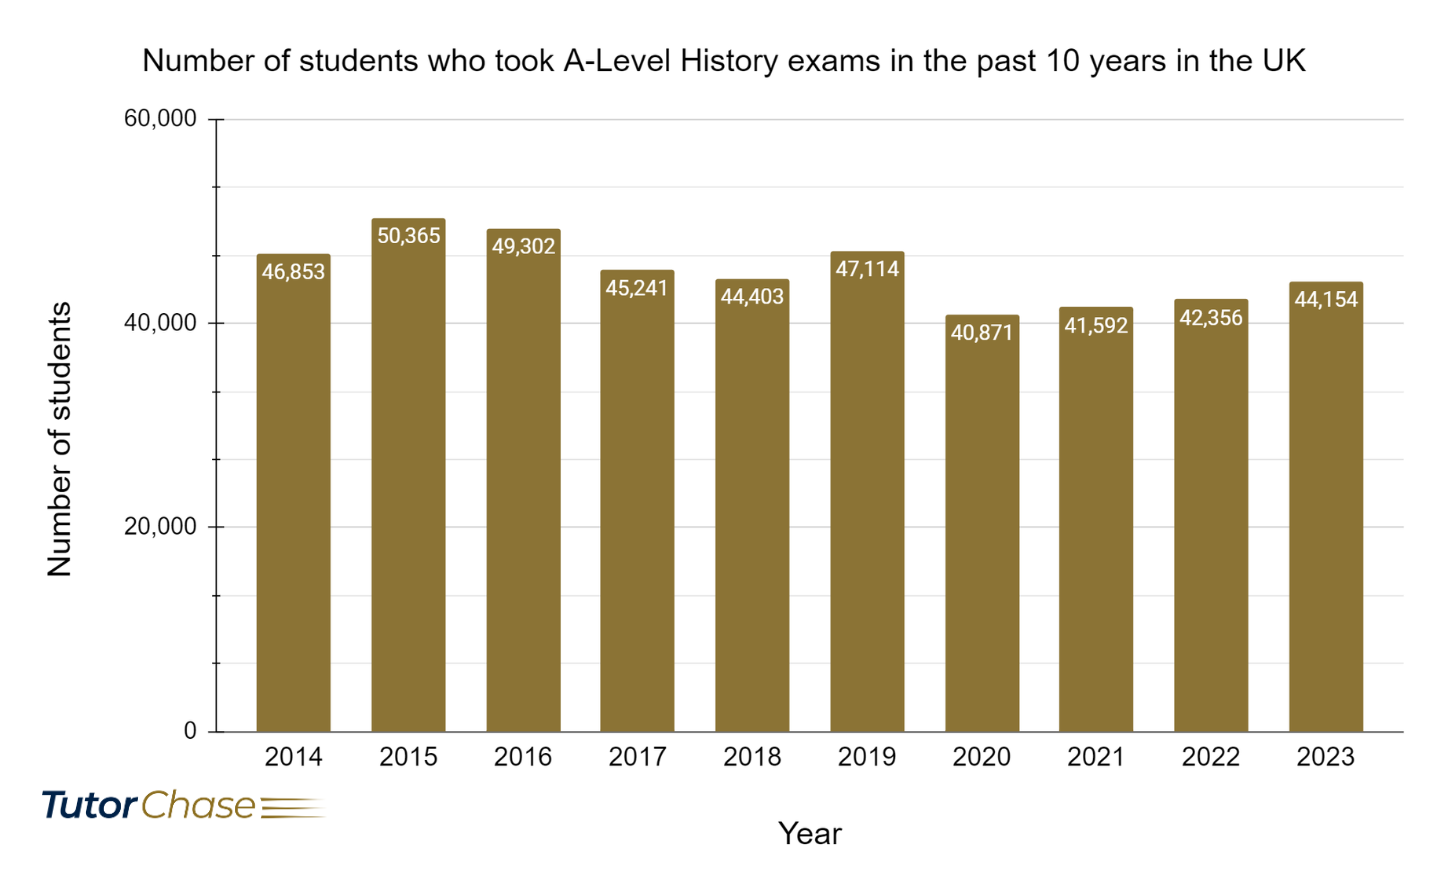 Number of students who took A-Level History exams in the past 10 years